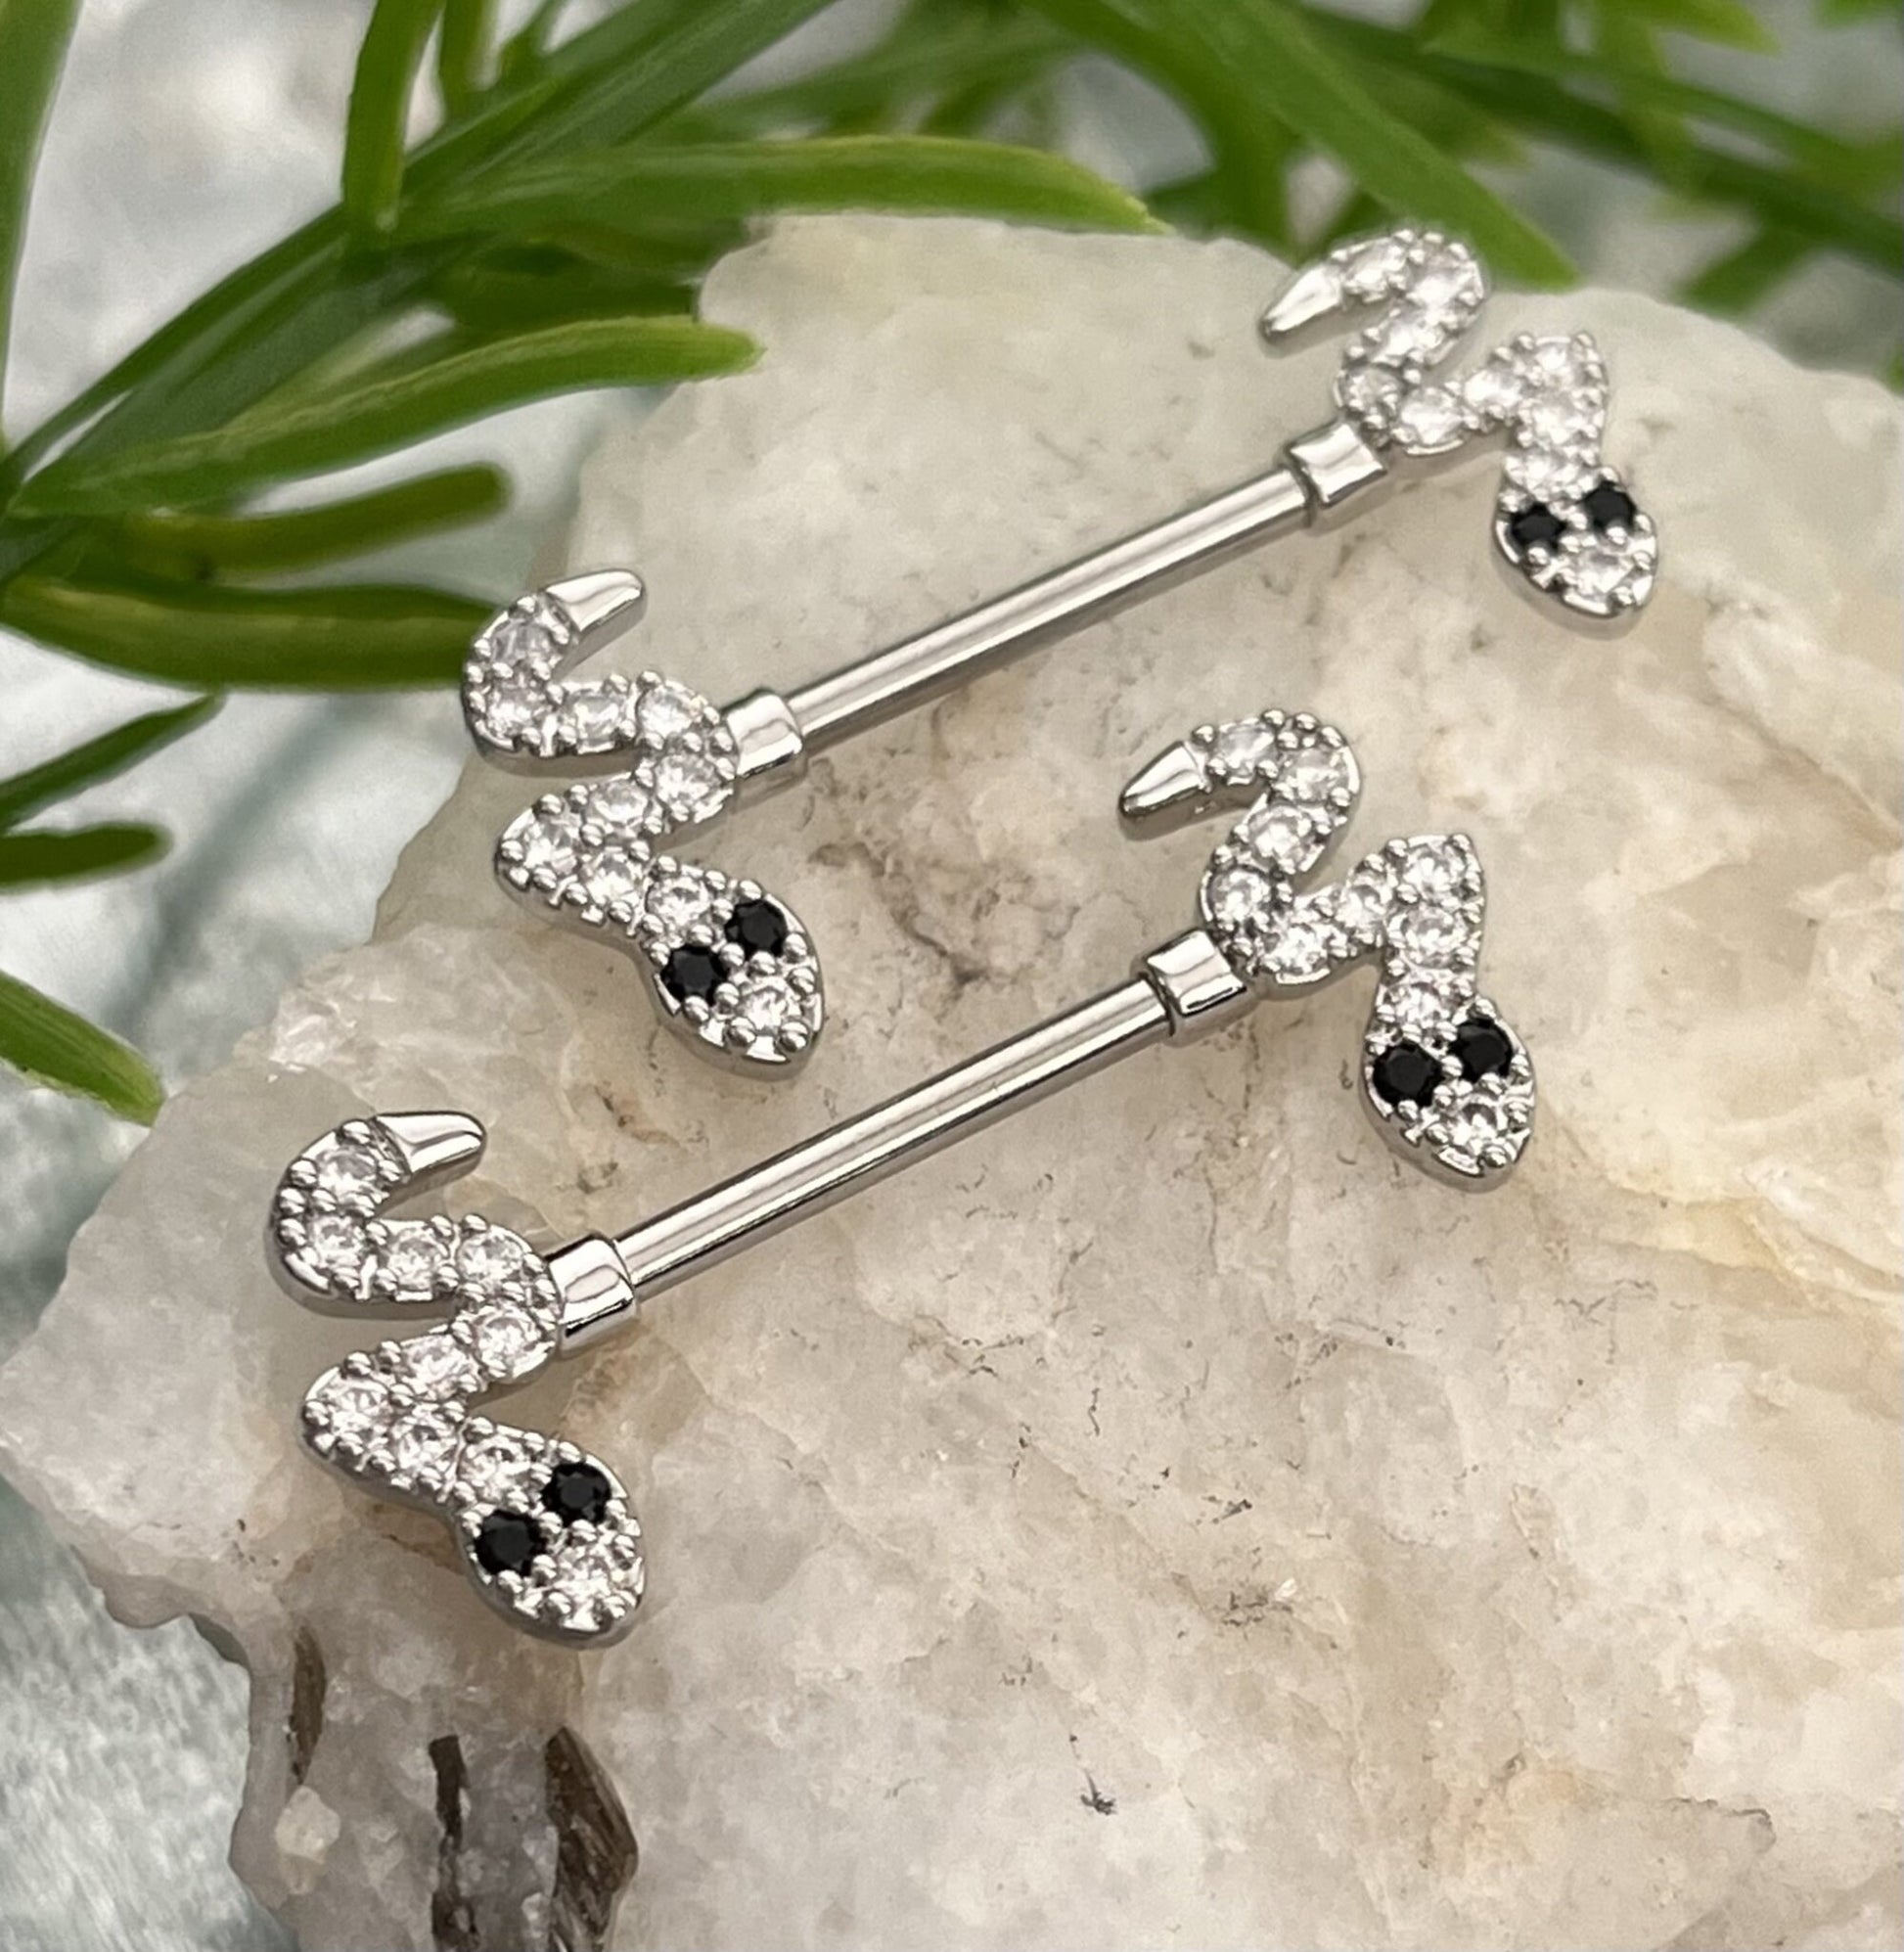 PAIR of Stunning CZ Gem Paved Snake Ends Nipple Barbells/Rings - 14g - Wearable Length 14mm, Gold and Silver Available!